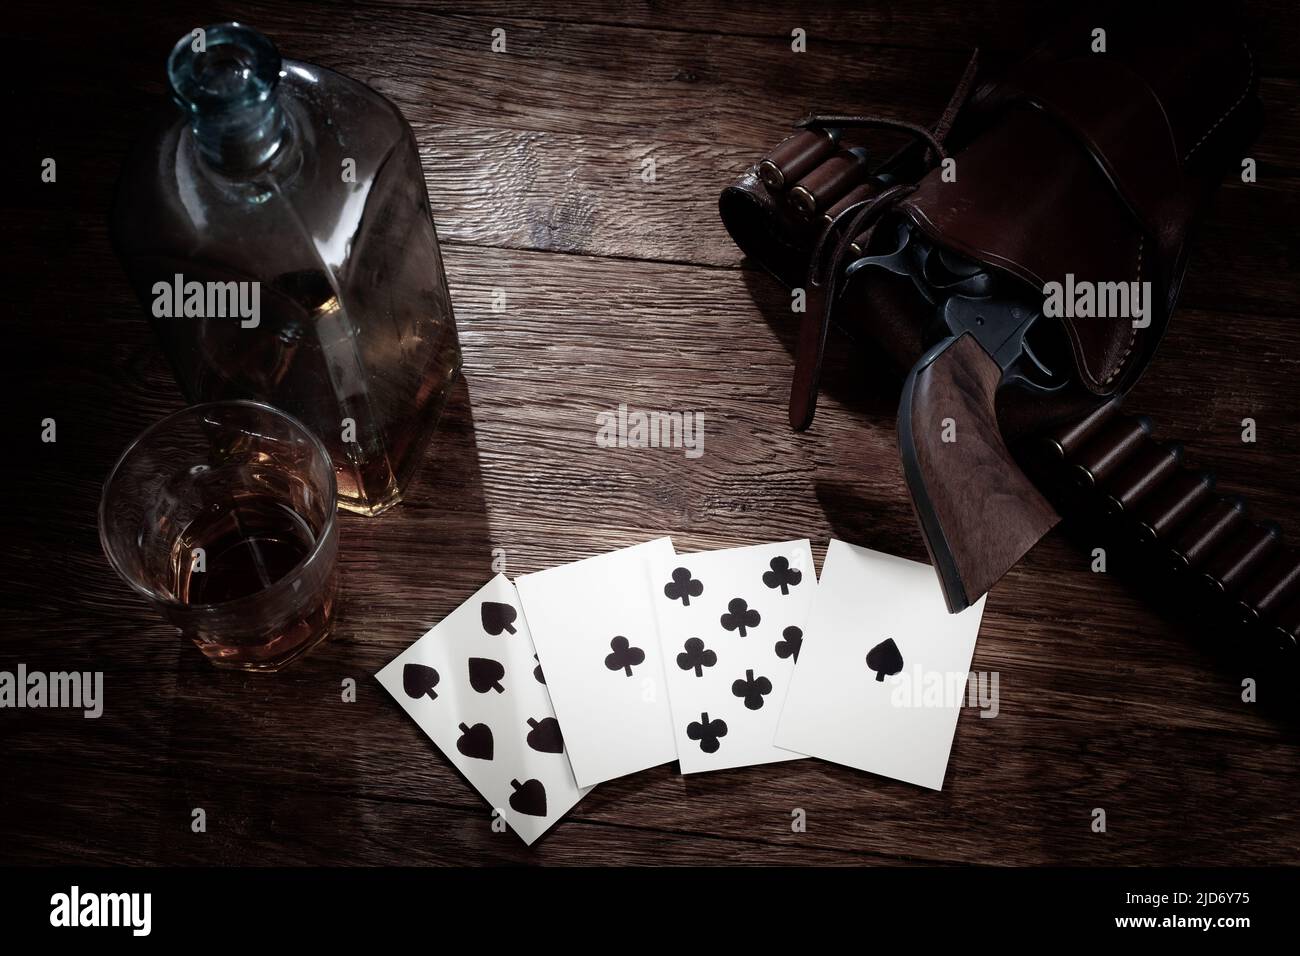 Wild west gambling. Dead man's hand. Two-pair poker hand consisting of the black aces and black eights, held by Old West folk hero, lawman, and gunfig Stock Photo